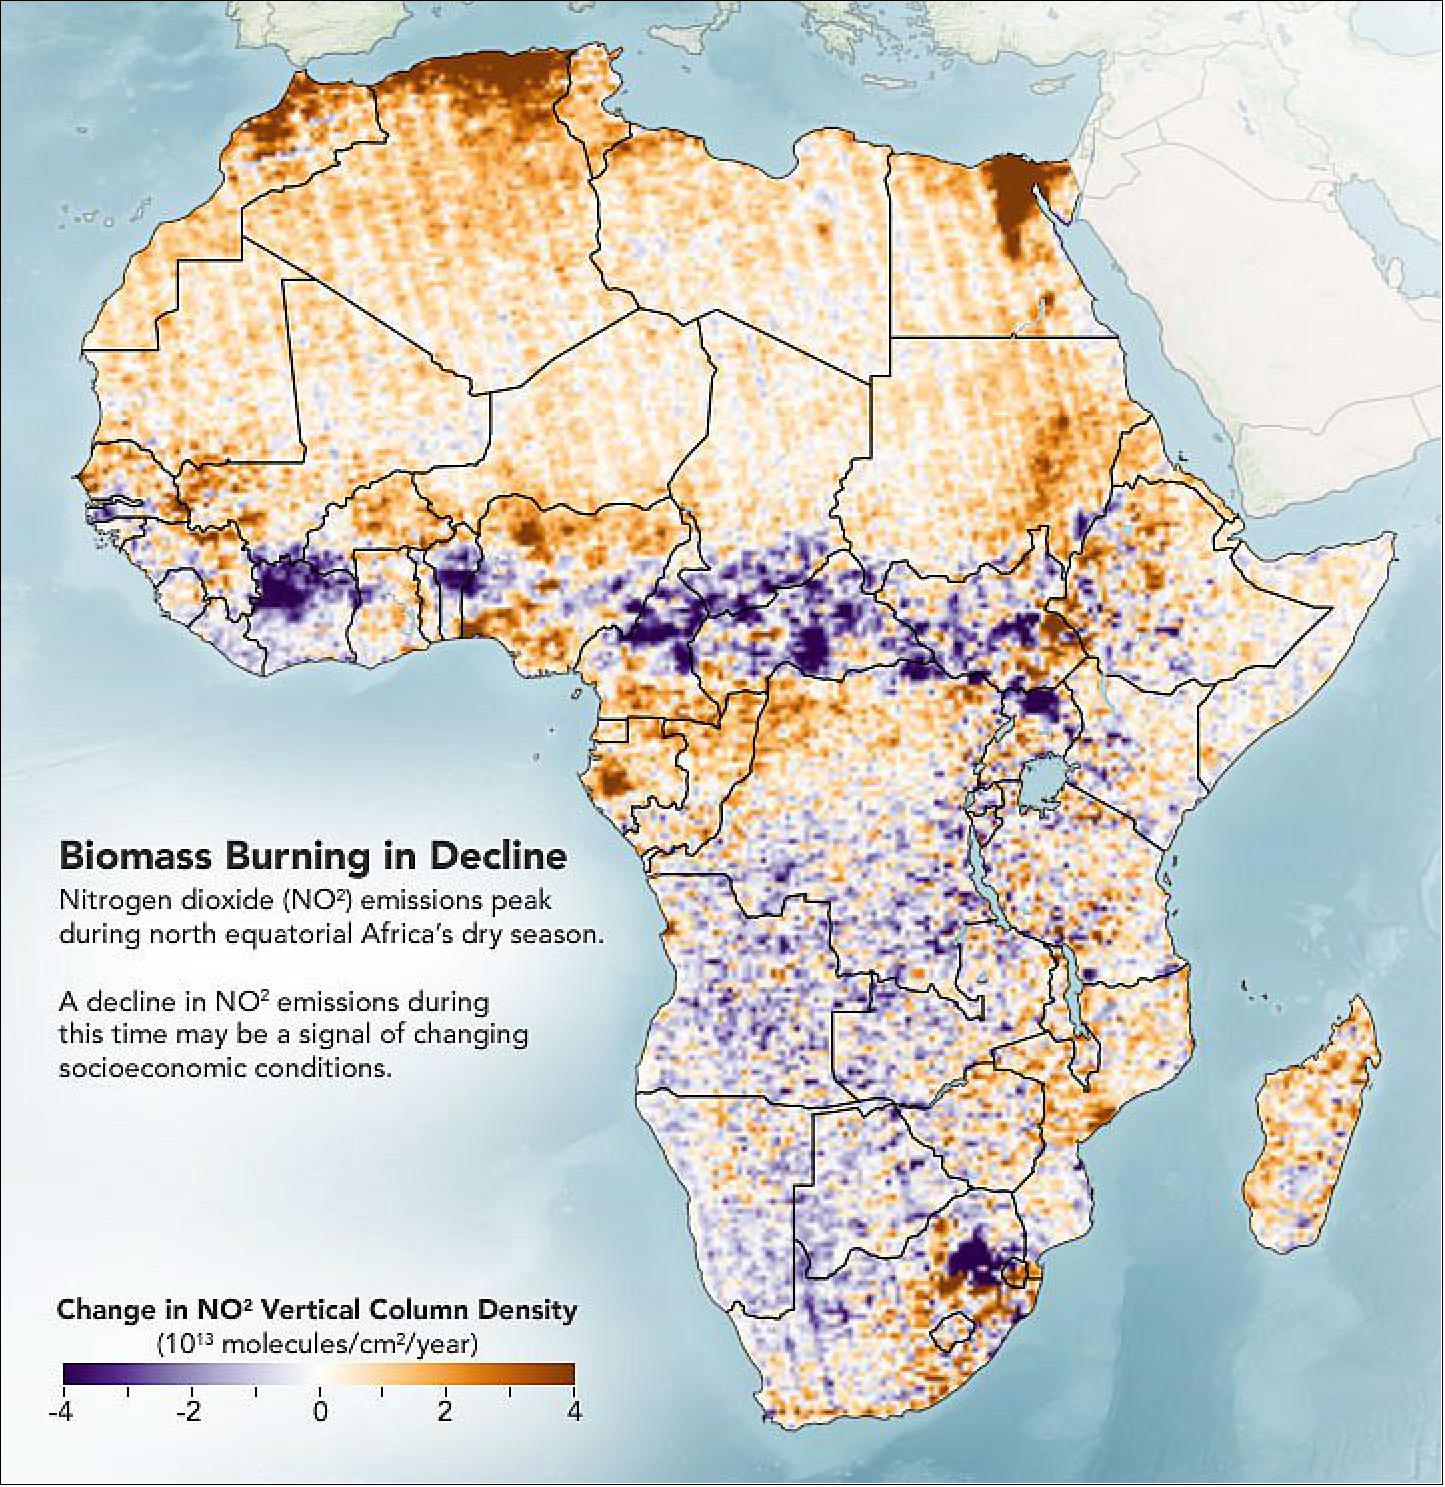 Figure 6: The map, derived from data collected by NASA’s Aura satellite, depicts changes in NO2 concentrations over Africa during November through February between 2005 to 2017 (image credit: NASA Earth Observatory)